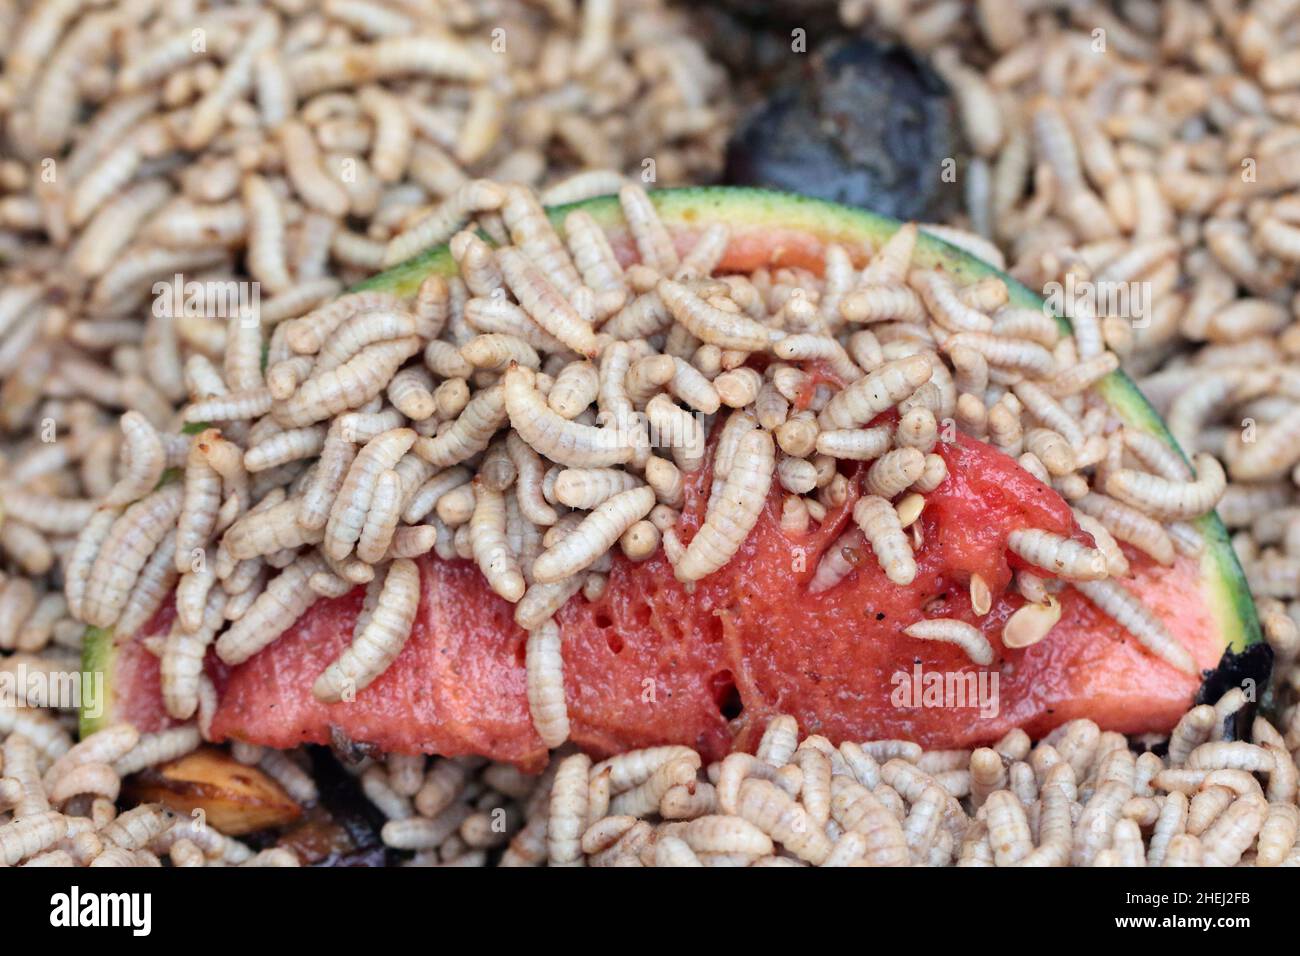 Hermetia illucens, the black soldier fly. Larvae eats a watermelon fruit. Protein animal feed ingredient. Stock Photo